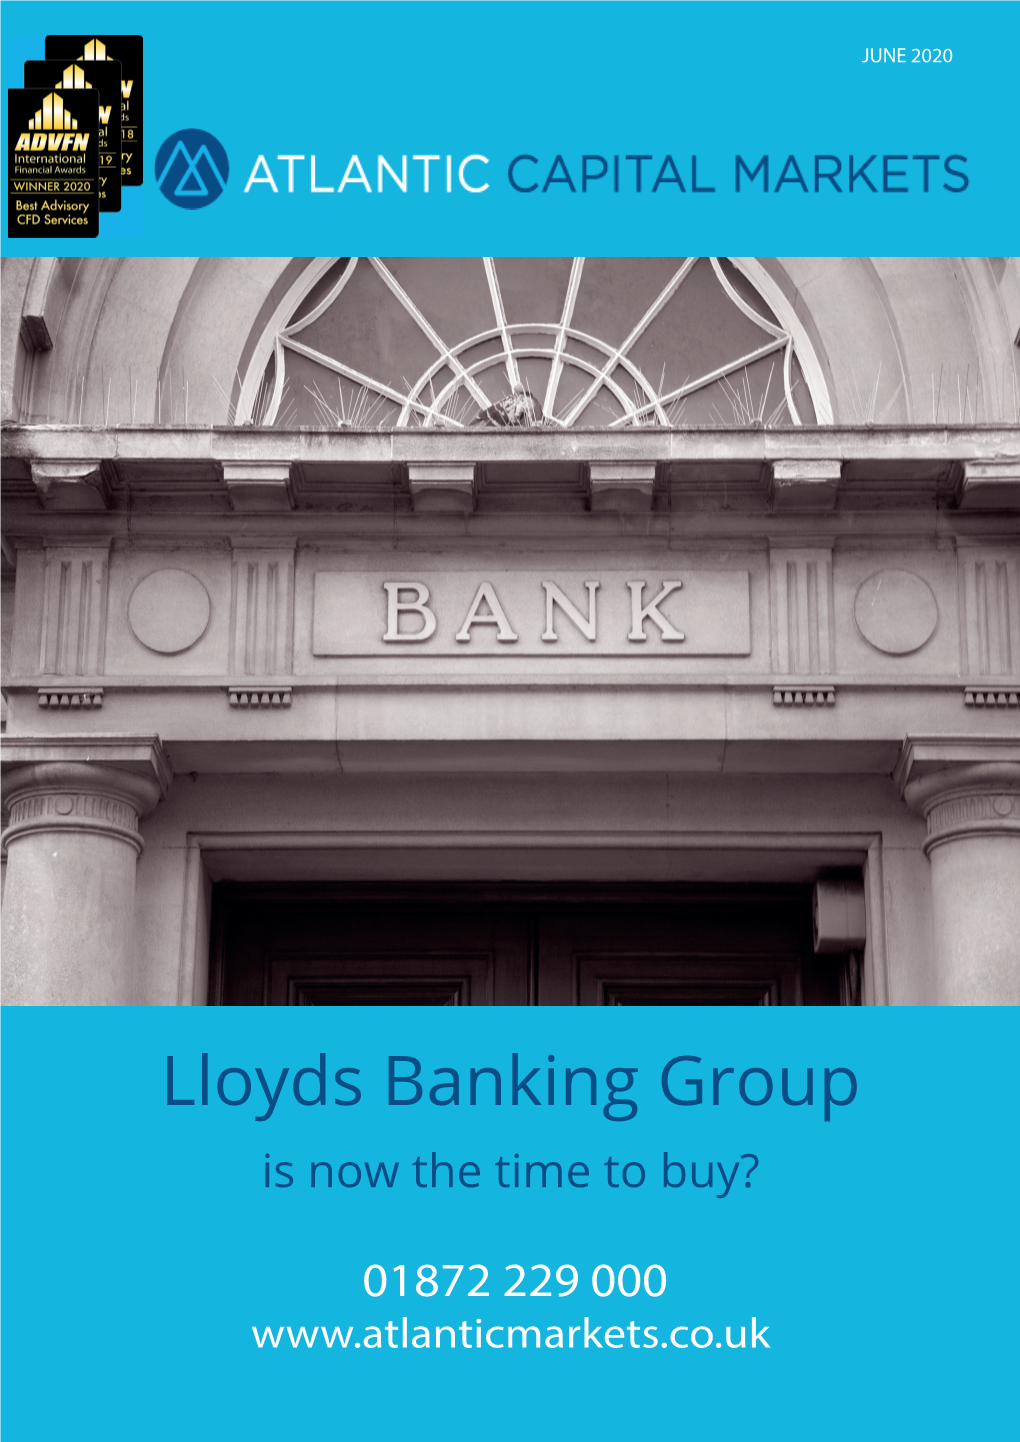 Lloyds Banking Group Is Now the Time to Buy?